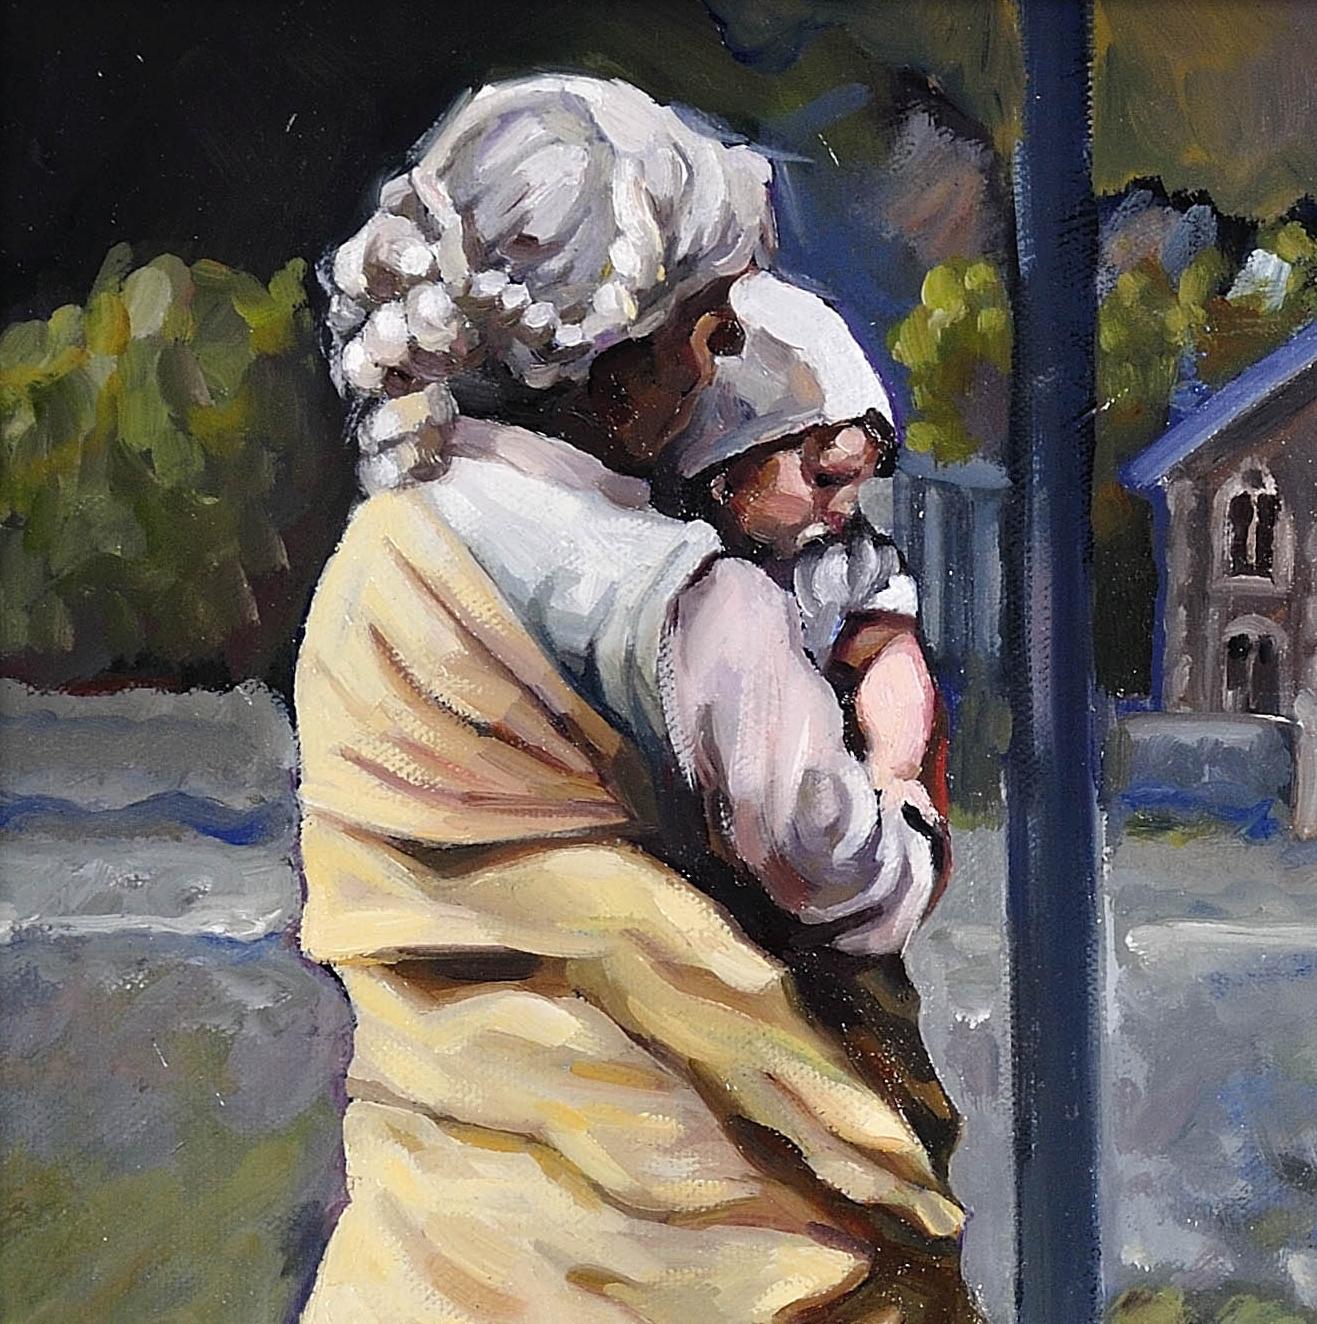 Waiting for dad (Disgwyl dad). Welsh working life, the everyday life. - Expressionist Painting by Elin Sian Blake